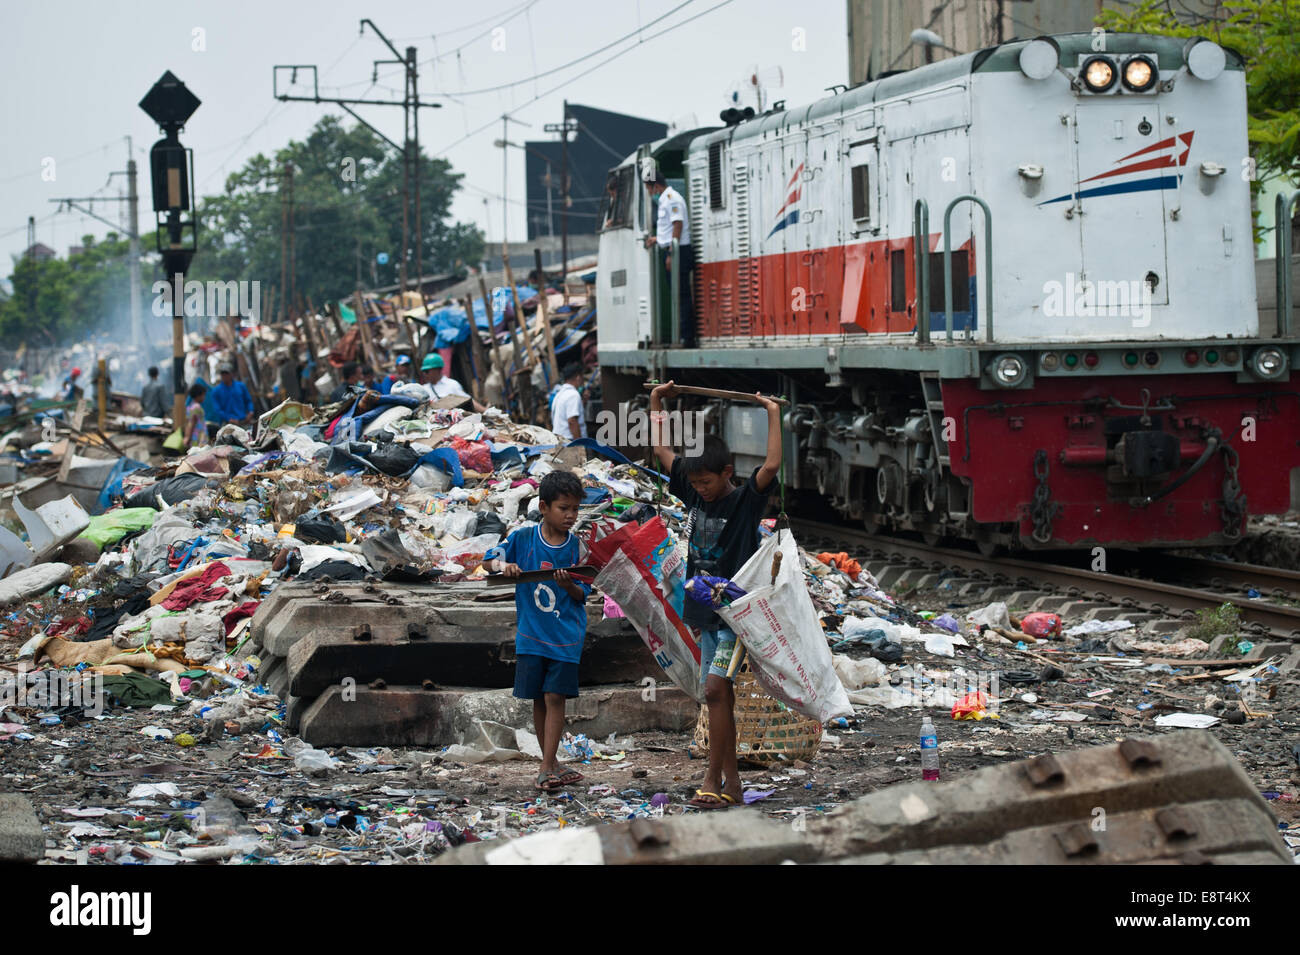 Jakarta, Indonesia. 14th Oct, 2014. Children collect the demolition on the edge of the railway in Jakarta, Indonesia, Oct. 14, 2014. The government of Jakarta curbs illegal housings along railway lines, which could endanger the safety of train travel. © Veri Sanovri/Xinhua/Alamy Live News Stock Photo